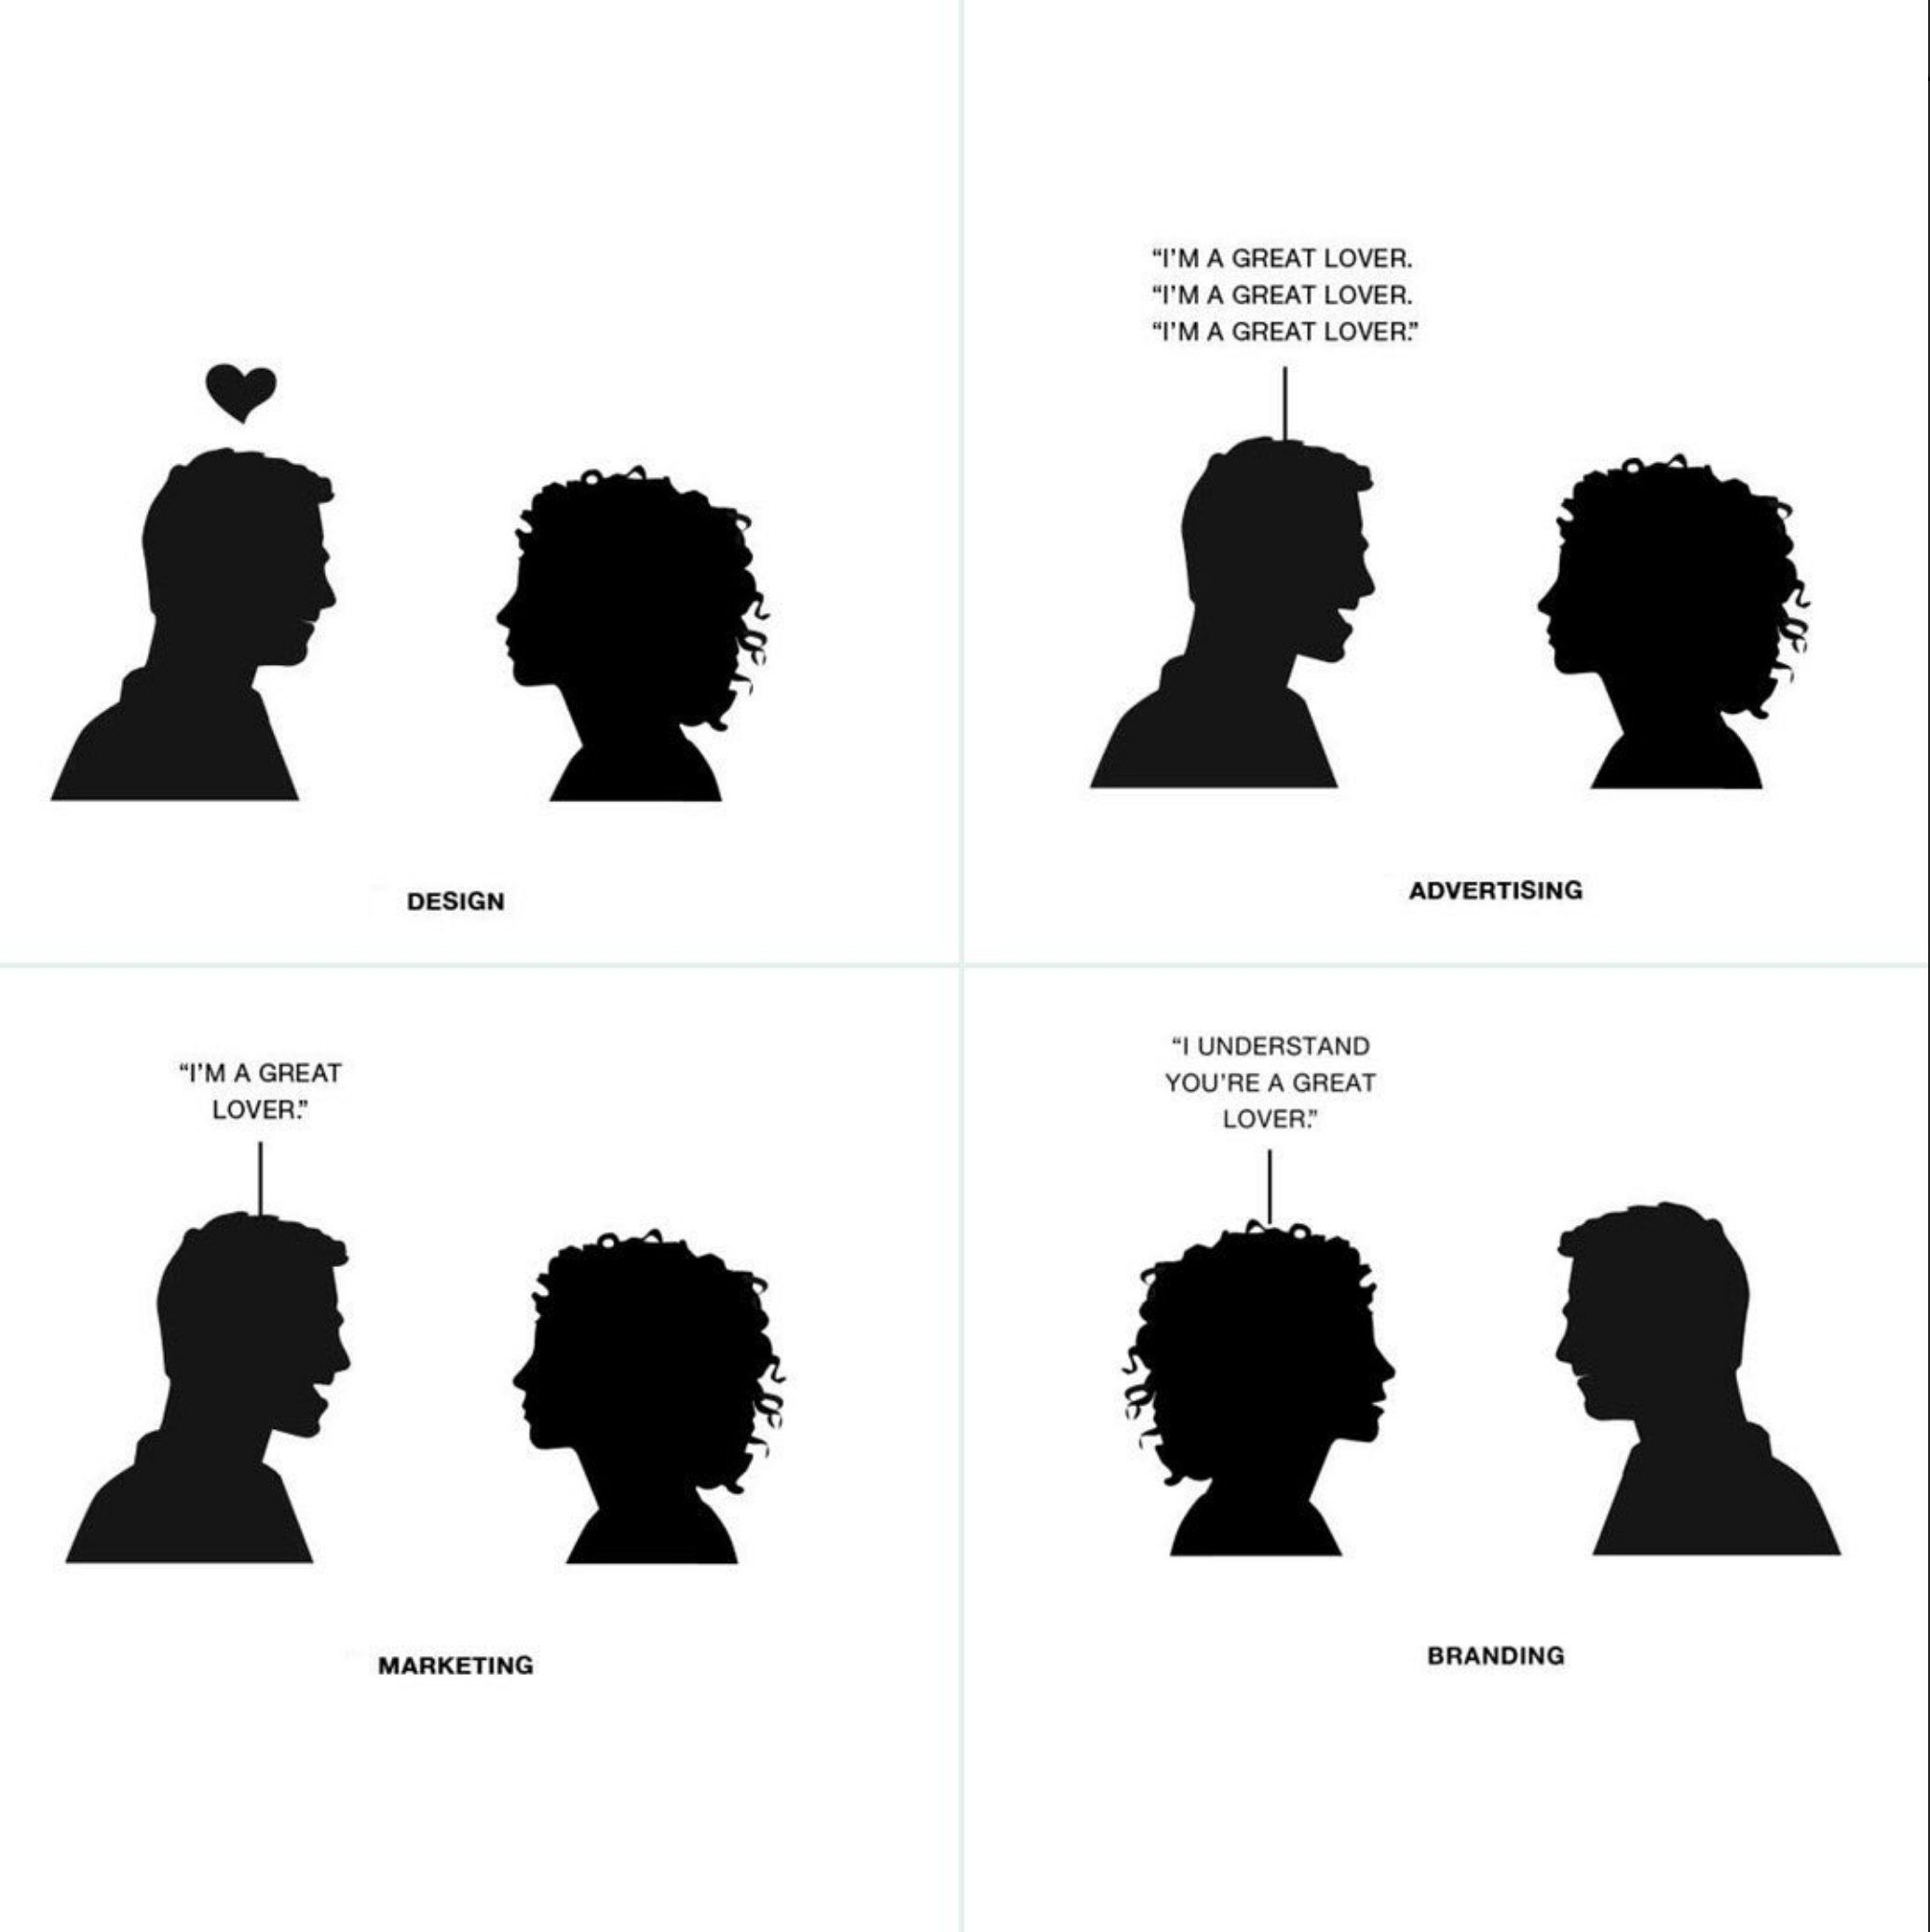 differences between branding, marketing, design and advertising.